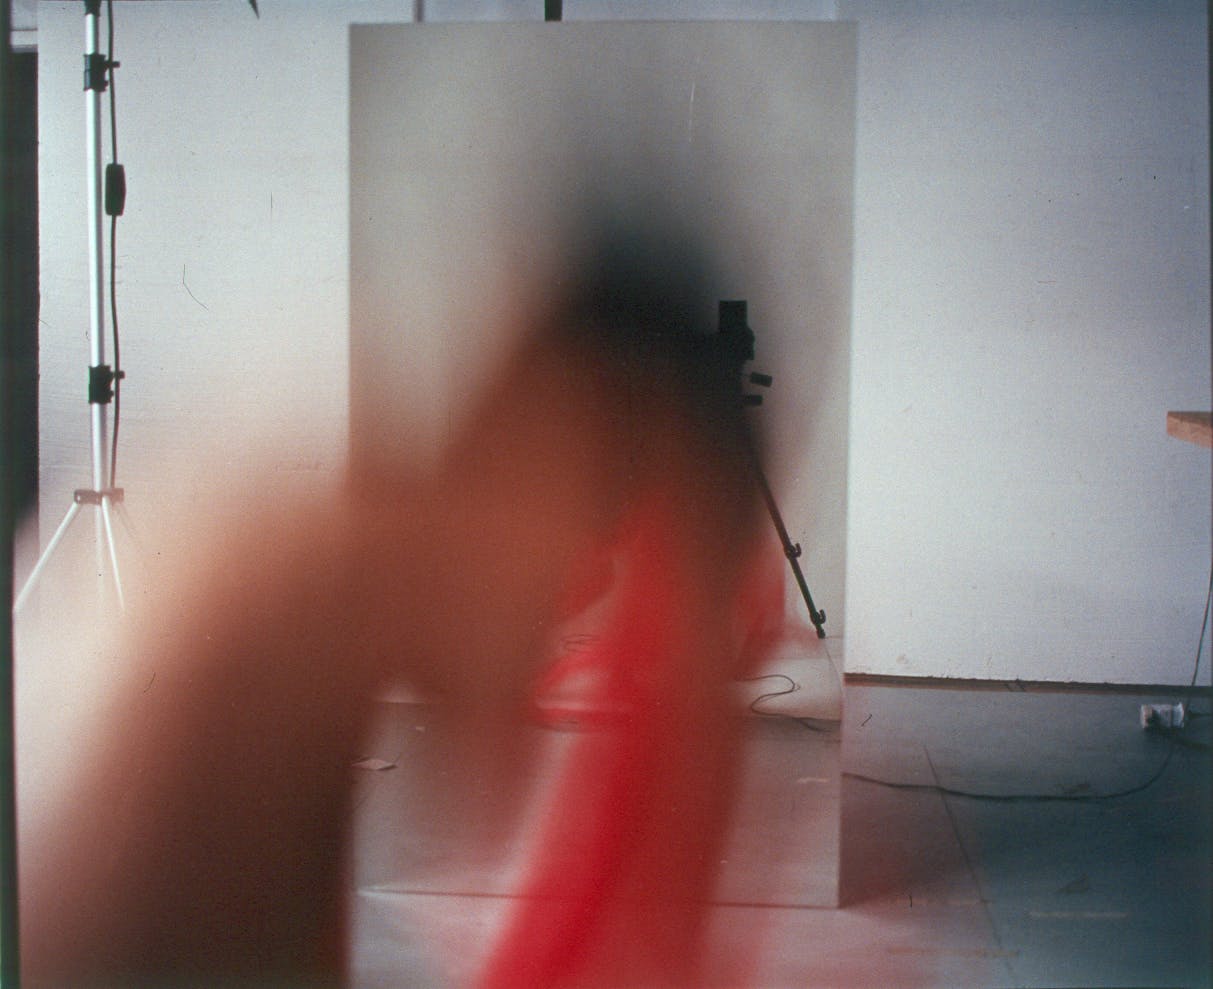 A photograph of an interior photo studio. Most of the image is obscured by an indiscernible blurred shape in the foreground. 